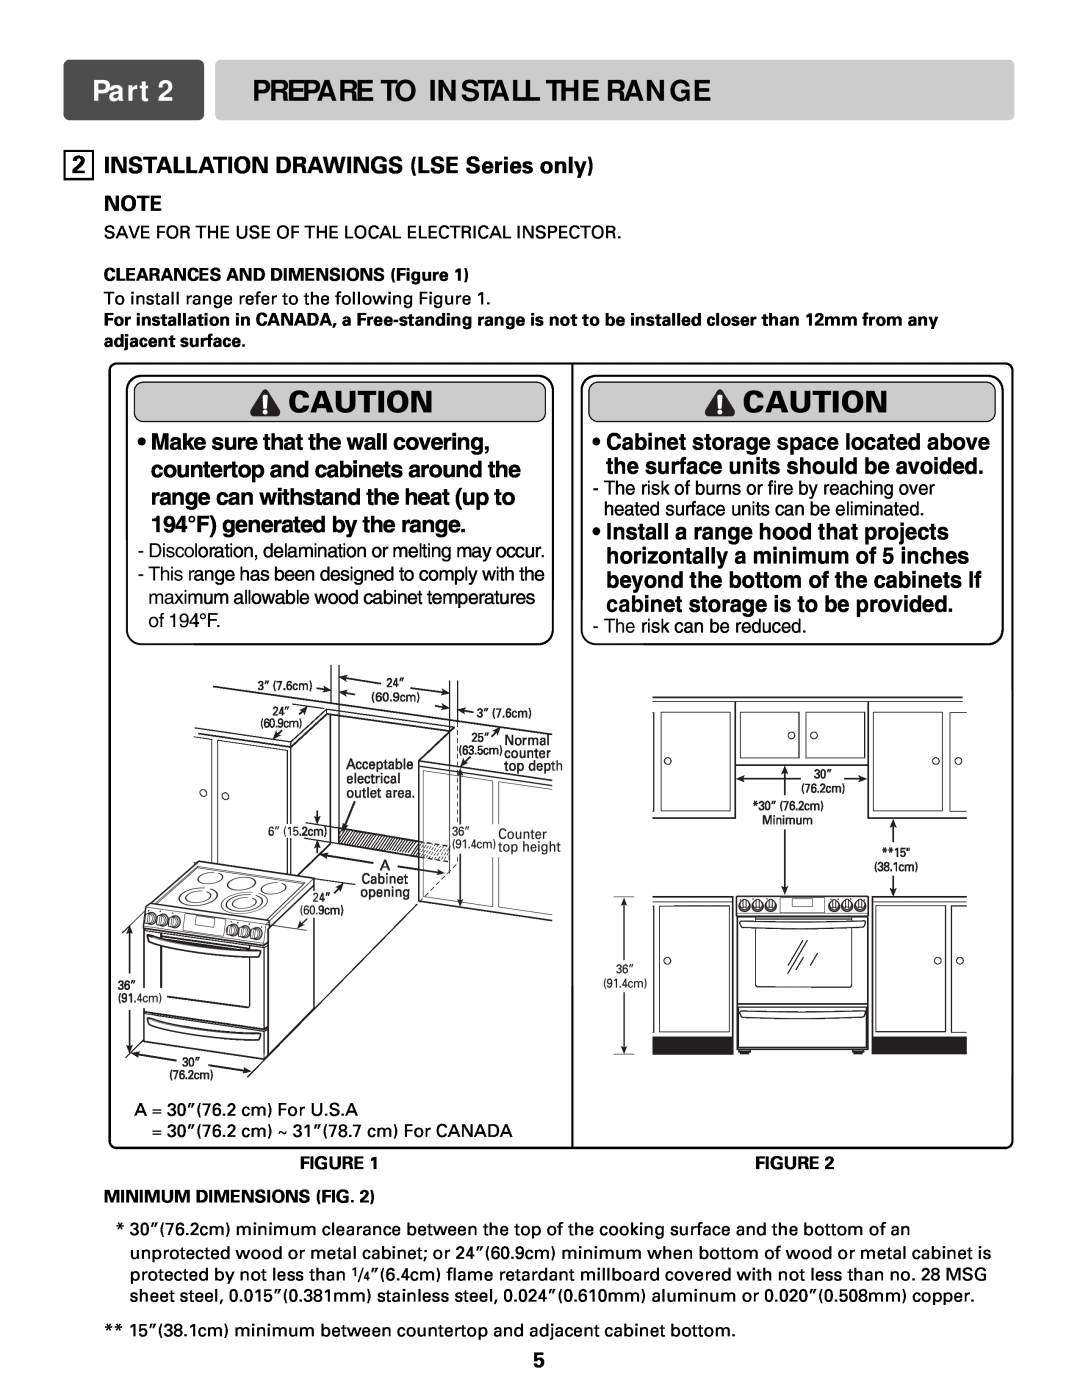 LG Electronics LSE3094S INSTALLATION DRAWINGS LSE Series only, Part 2 PREPARE TO INSTALL THE RANGE, Caution Caution 